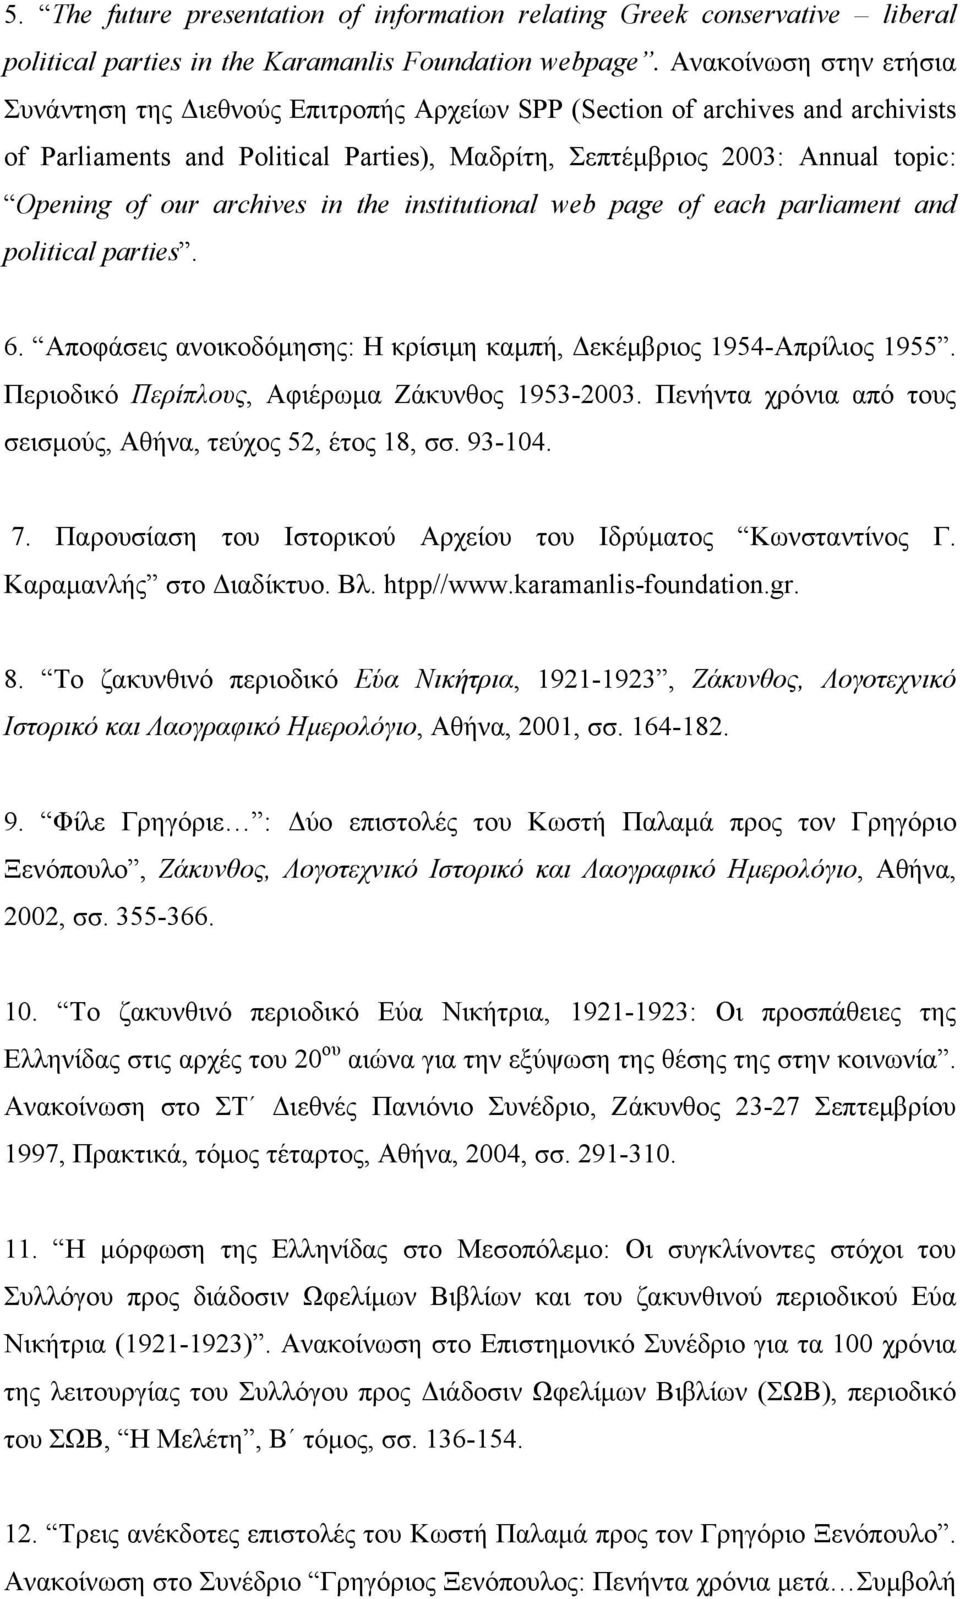 archives in the institutional web page of each parliament and political parties. 6. Αποφάσεις ανοικοδόμησης: Η κρίσιμη καμπή, Δεκέμβριος 1954-Απρίλιος 1955.